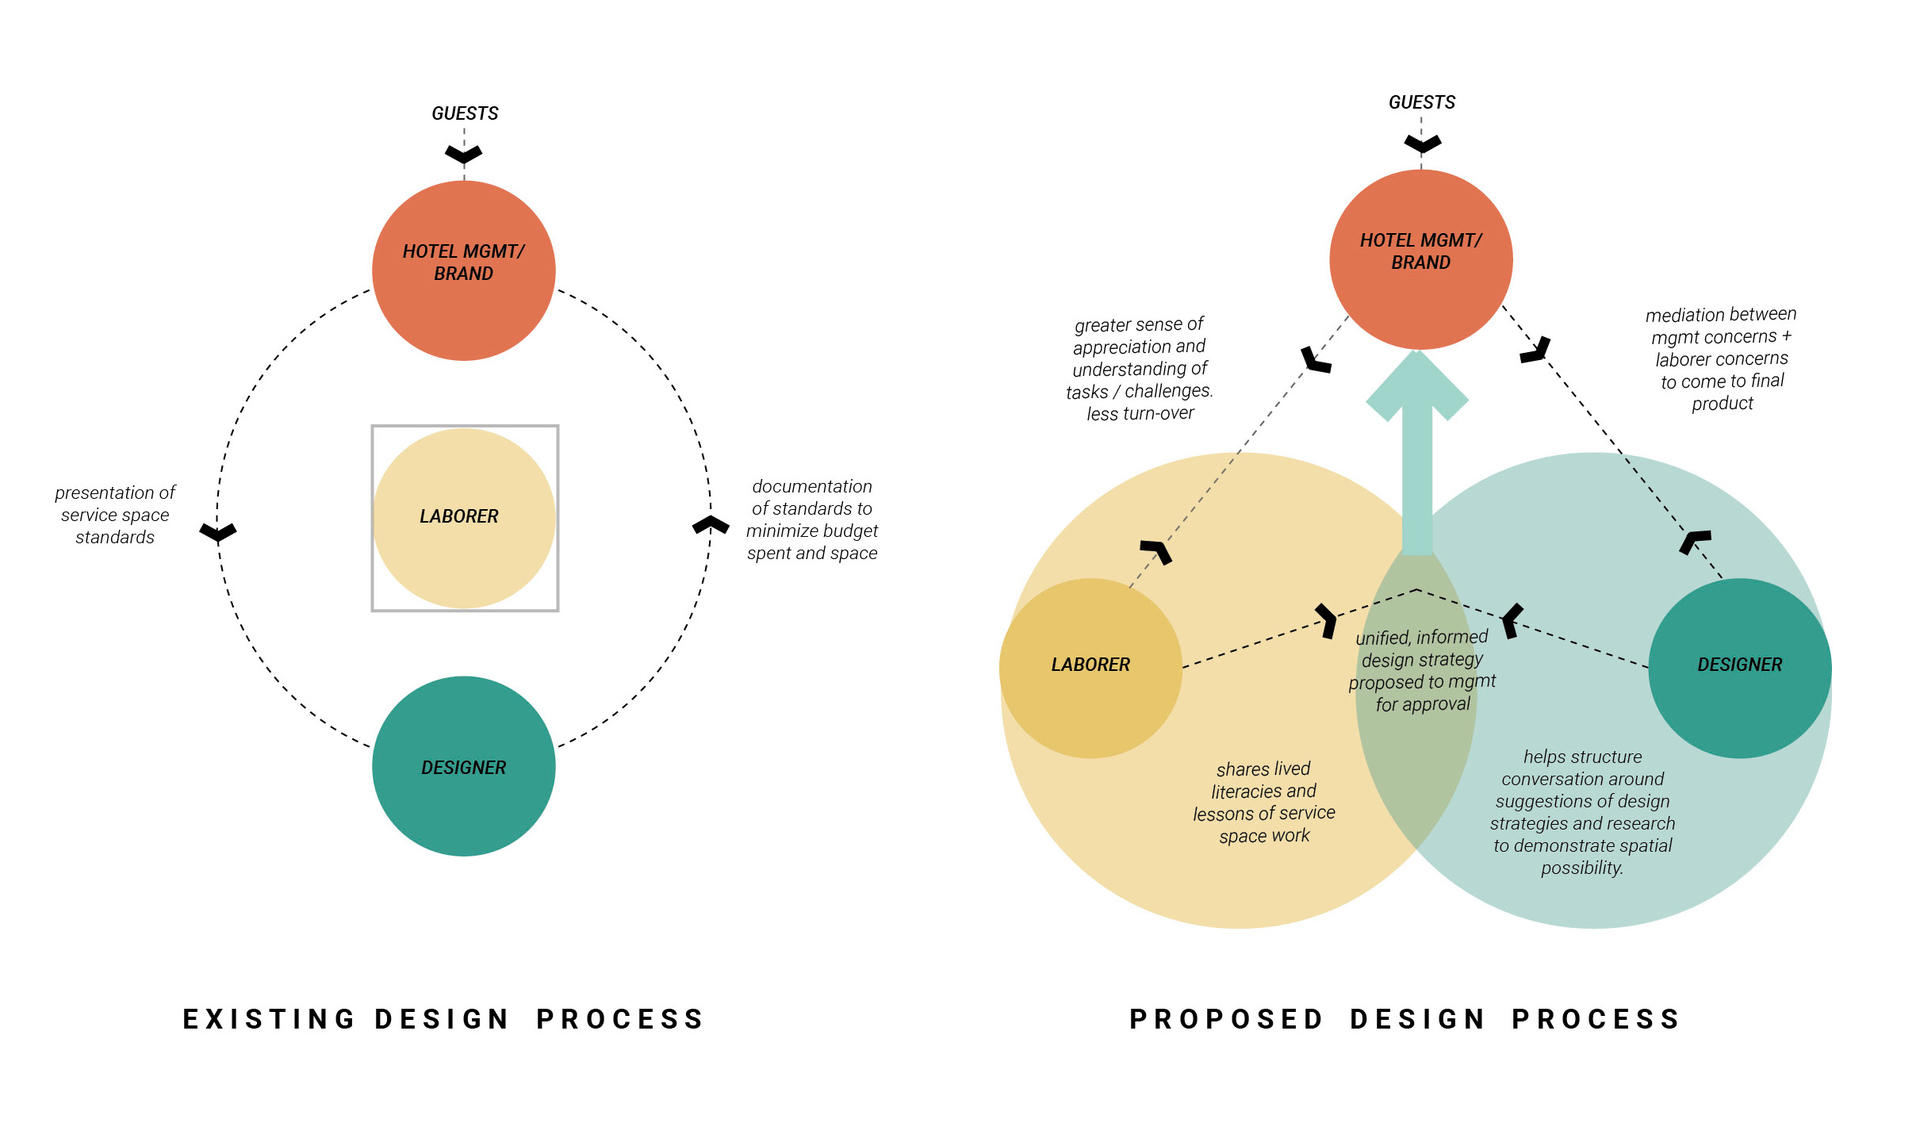 Two separate bubble diagrams demonstrating design processes where hotel management works directly with the designer only vs the addition of service workers into the design process as a second strategy.